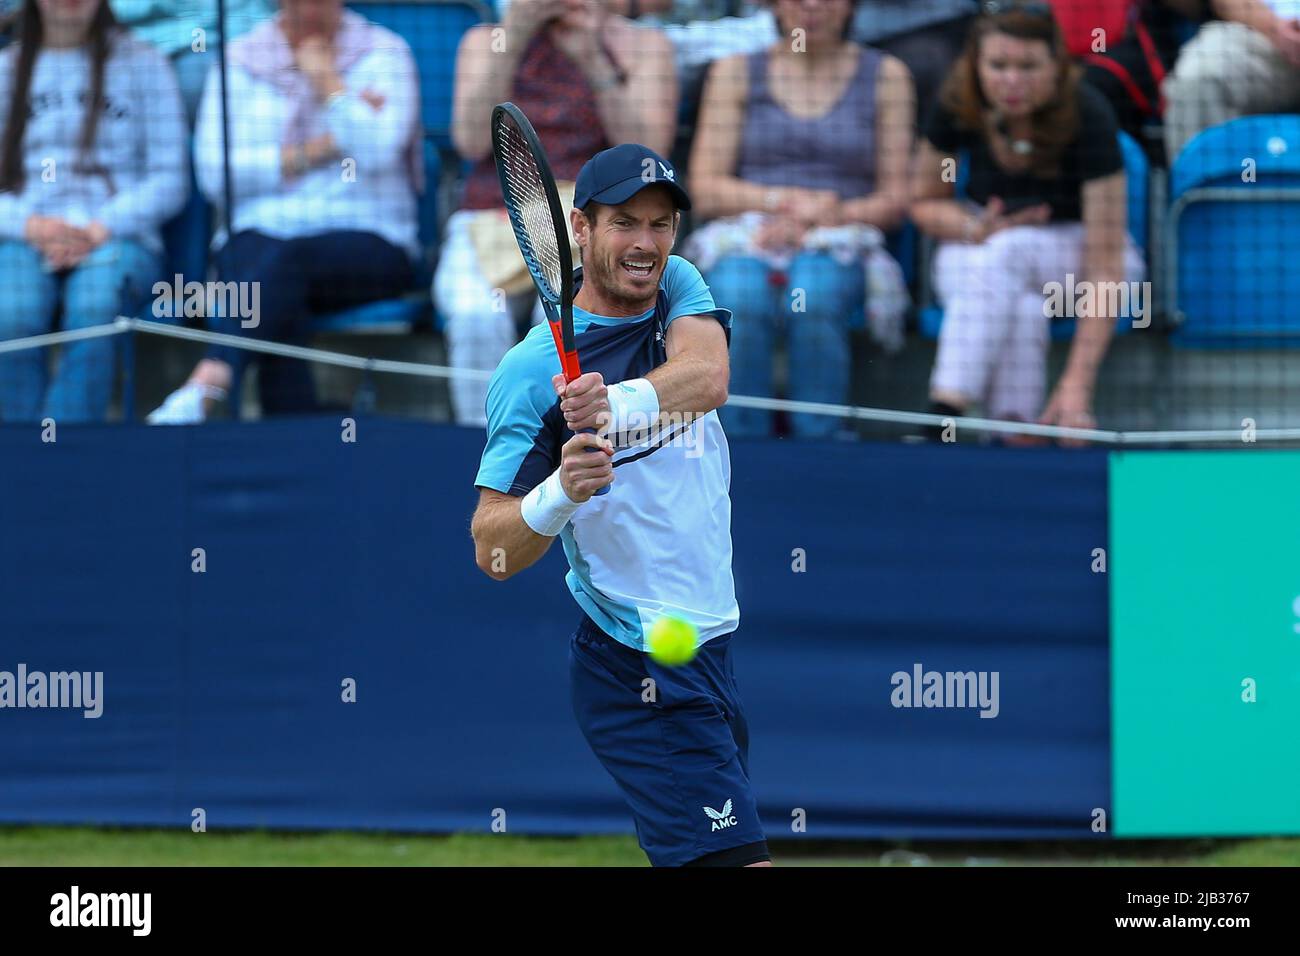 Andy Murray beats Gijs Brouwer in Surbiton Trophy to progress into